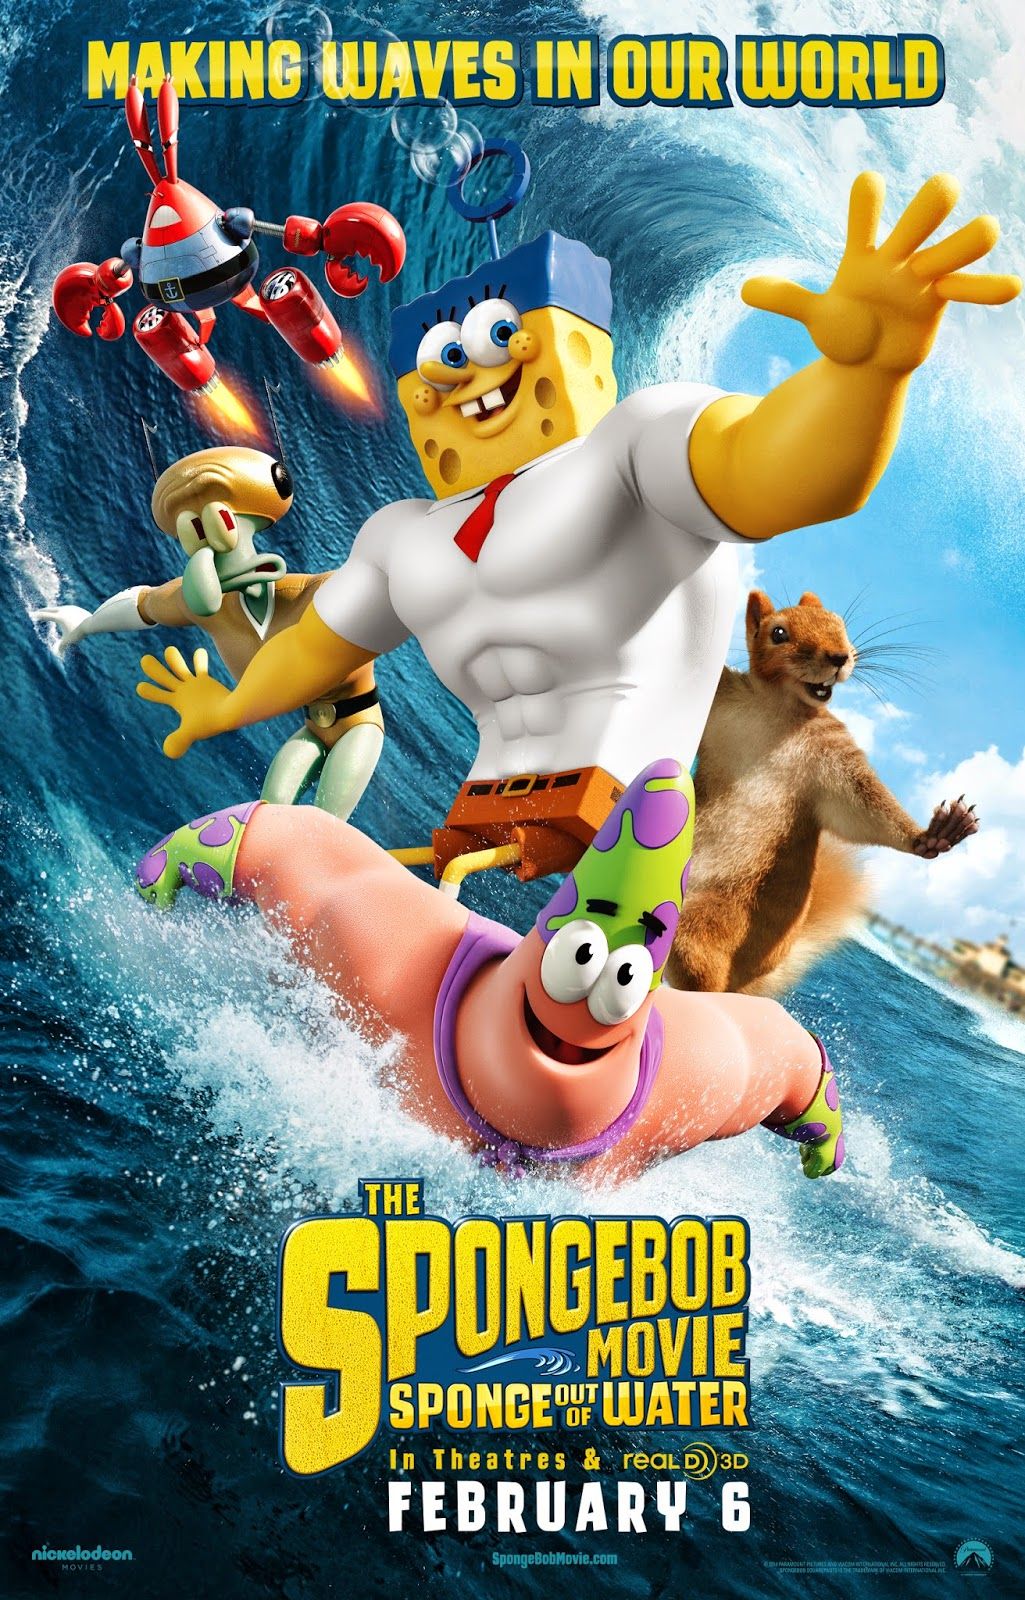 MOVIE REVIEW: The SpongeBob Movie: Sponge Out of Water (2015) GOLLUMPUS